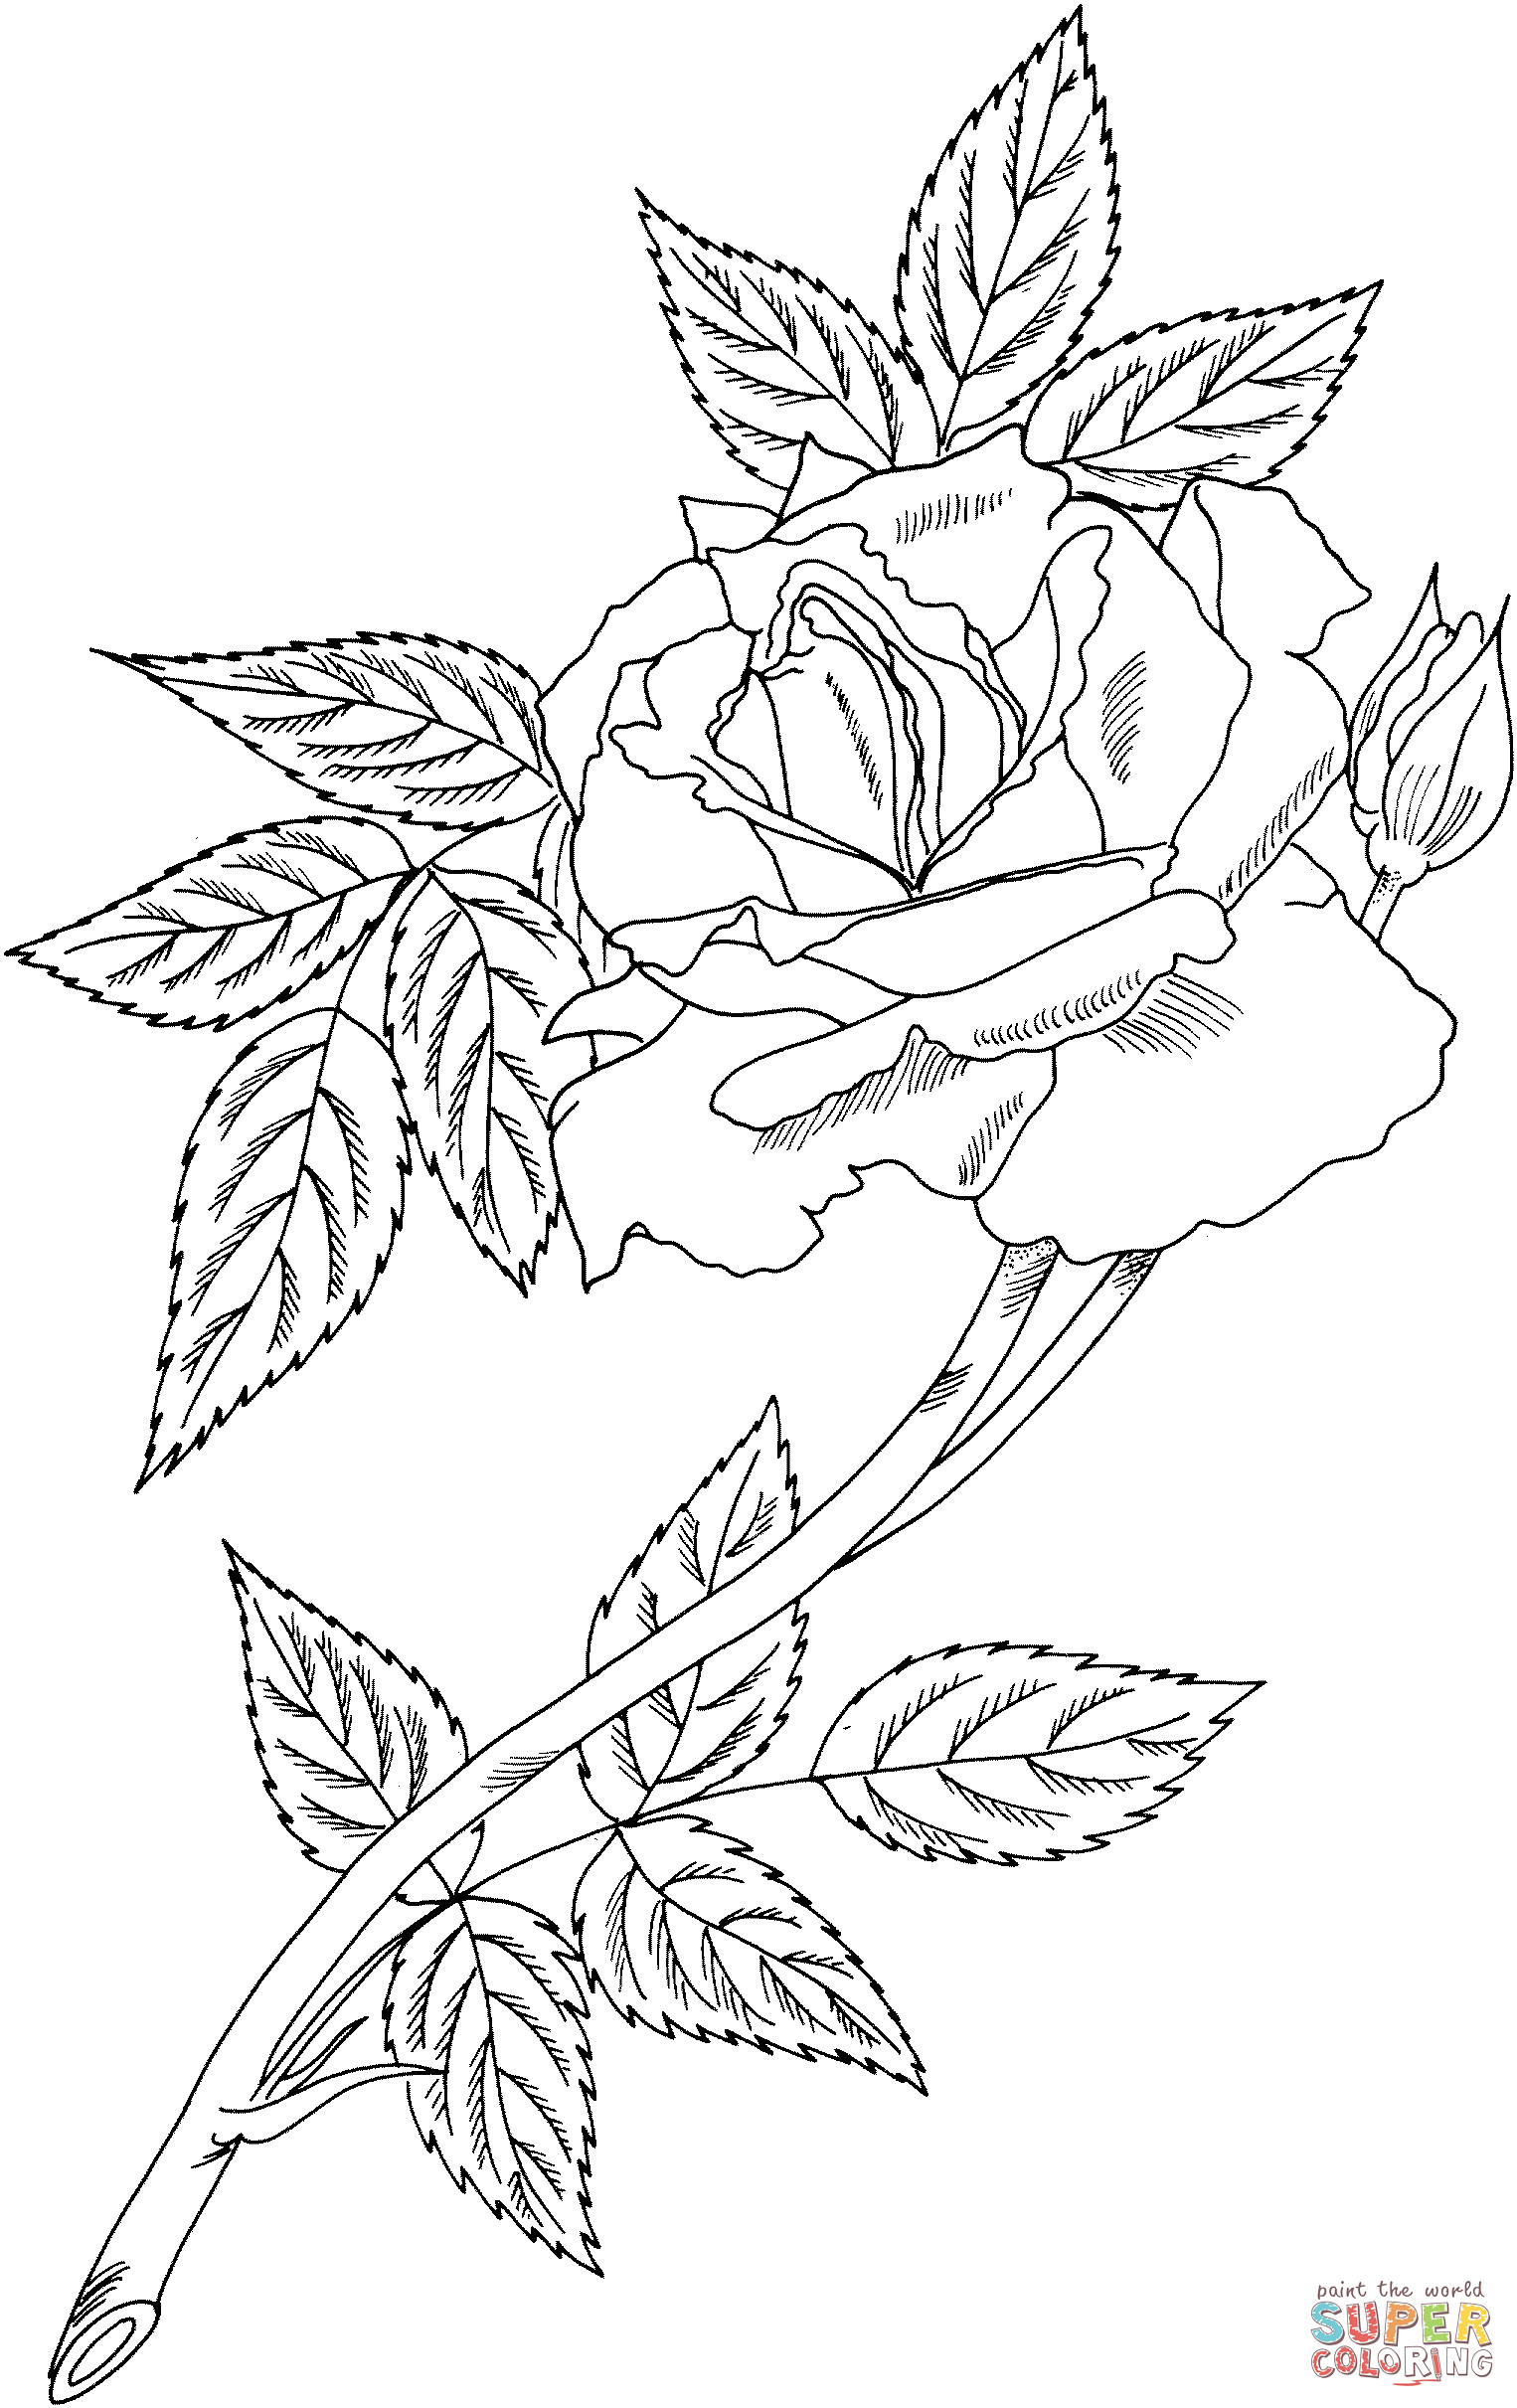 Royal sunset climbing rose coloring page free printable coloring pages